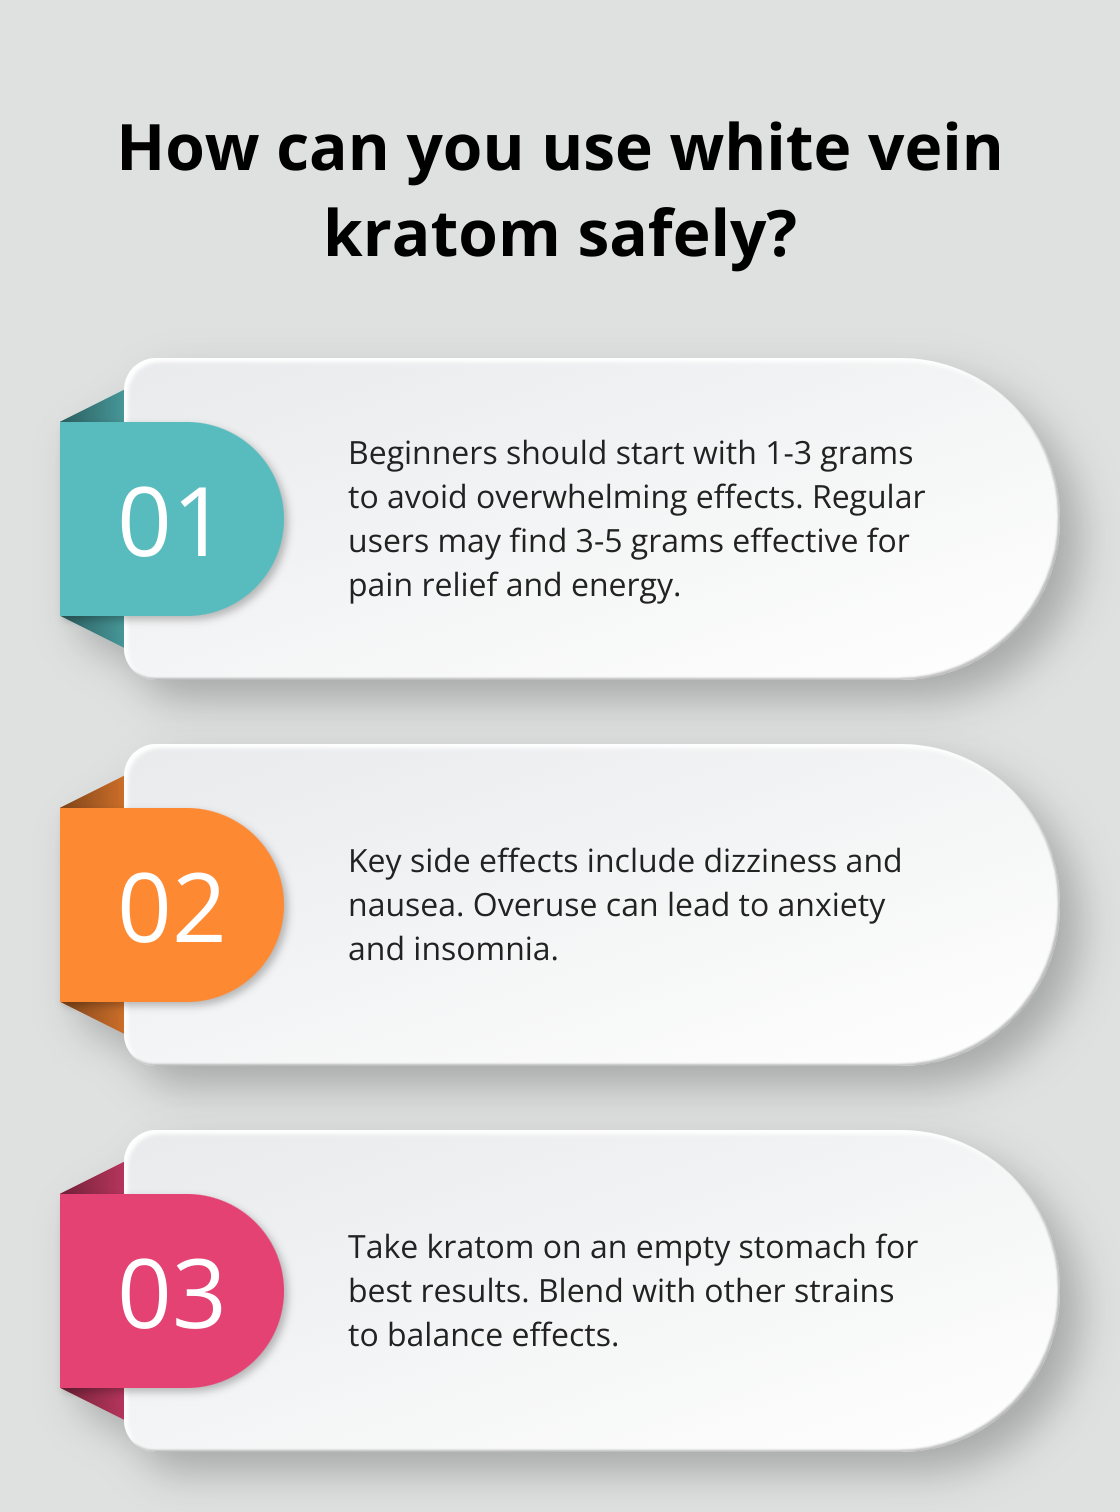 Fact - How can you use white vein kratom safely?